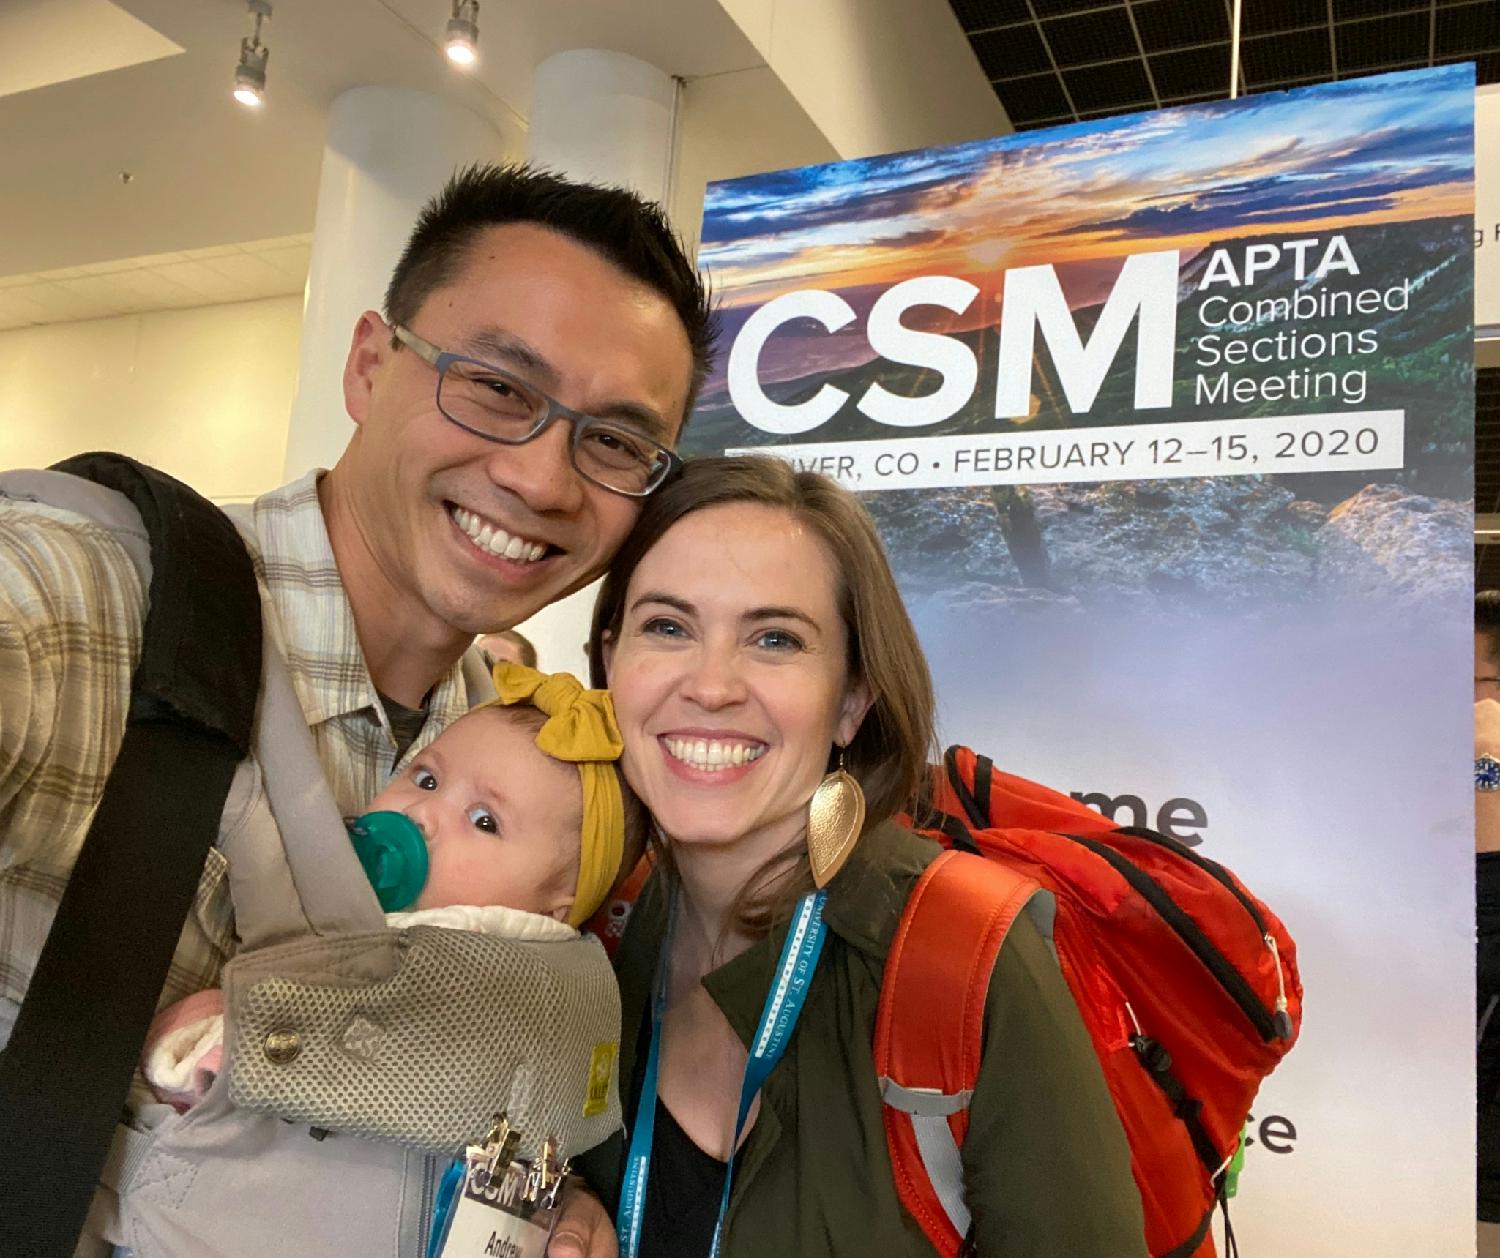 Andrew and Becca are both PTs at Agile and this is them at the CSM conference with their newborn baby Story